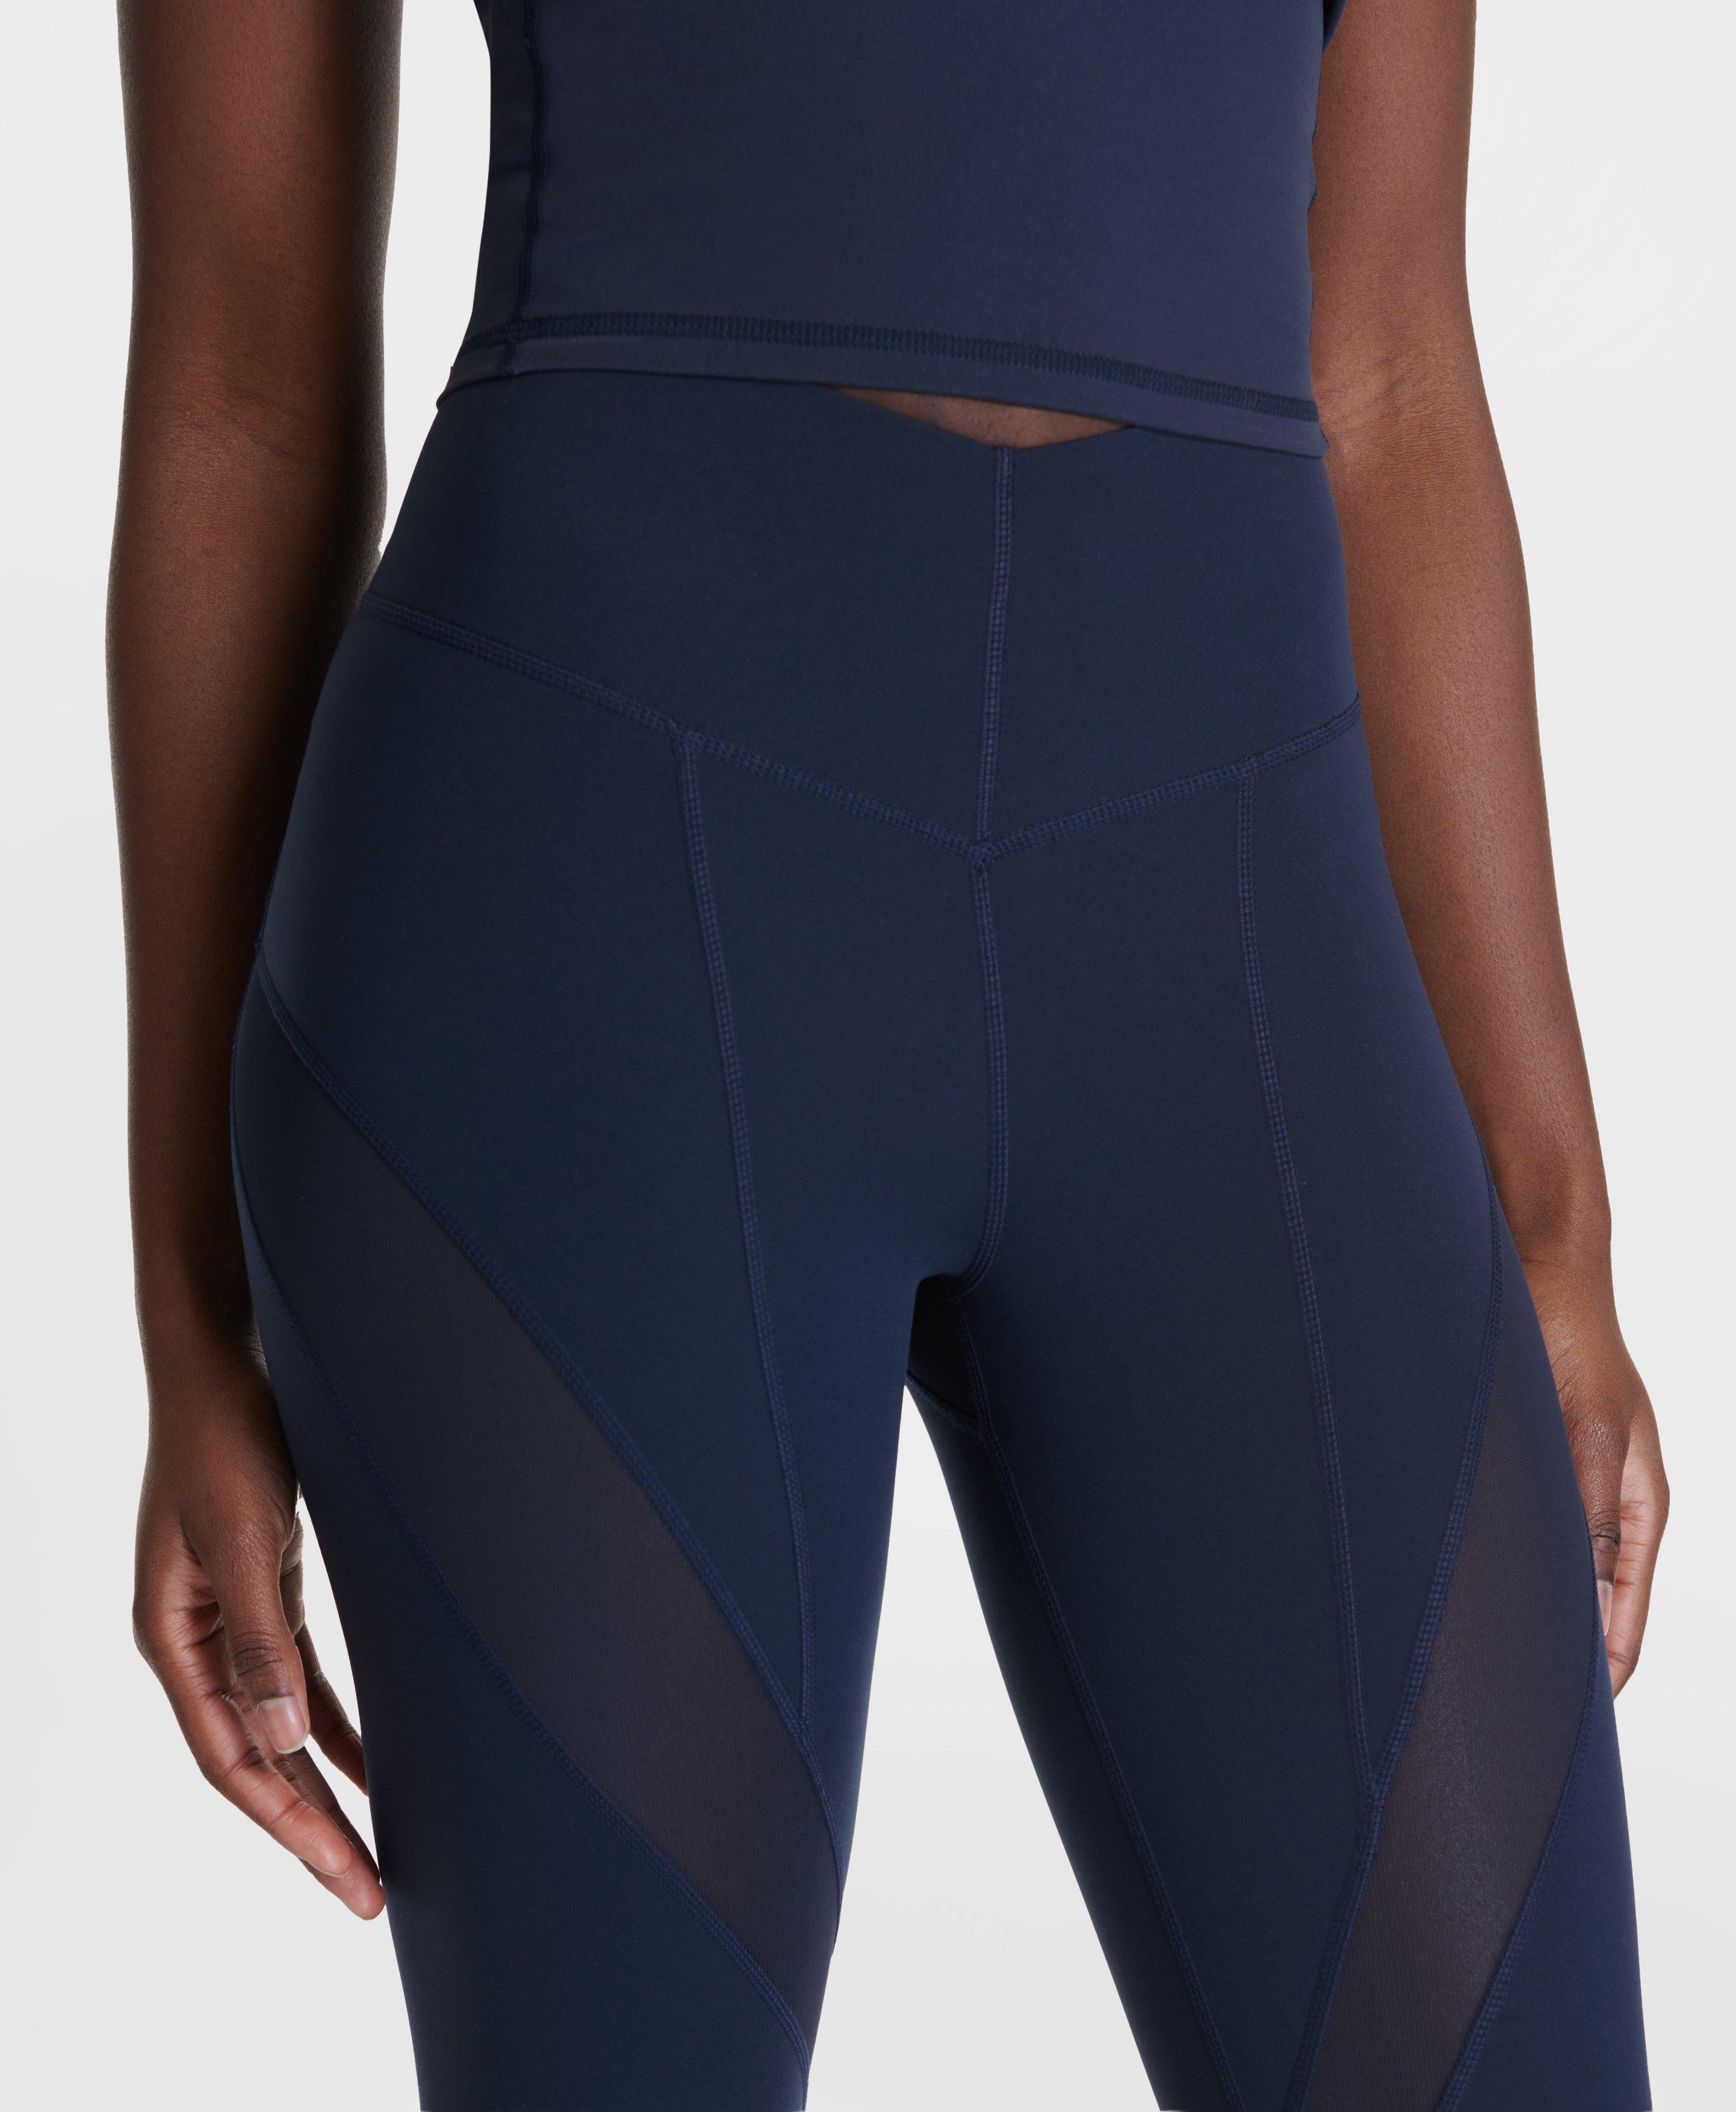 JUST-DRY Regal Blue Mesh Panel 7/8 Go Train Tights for Women